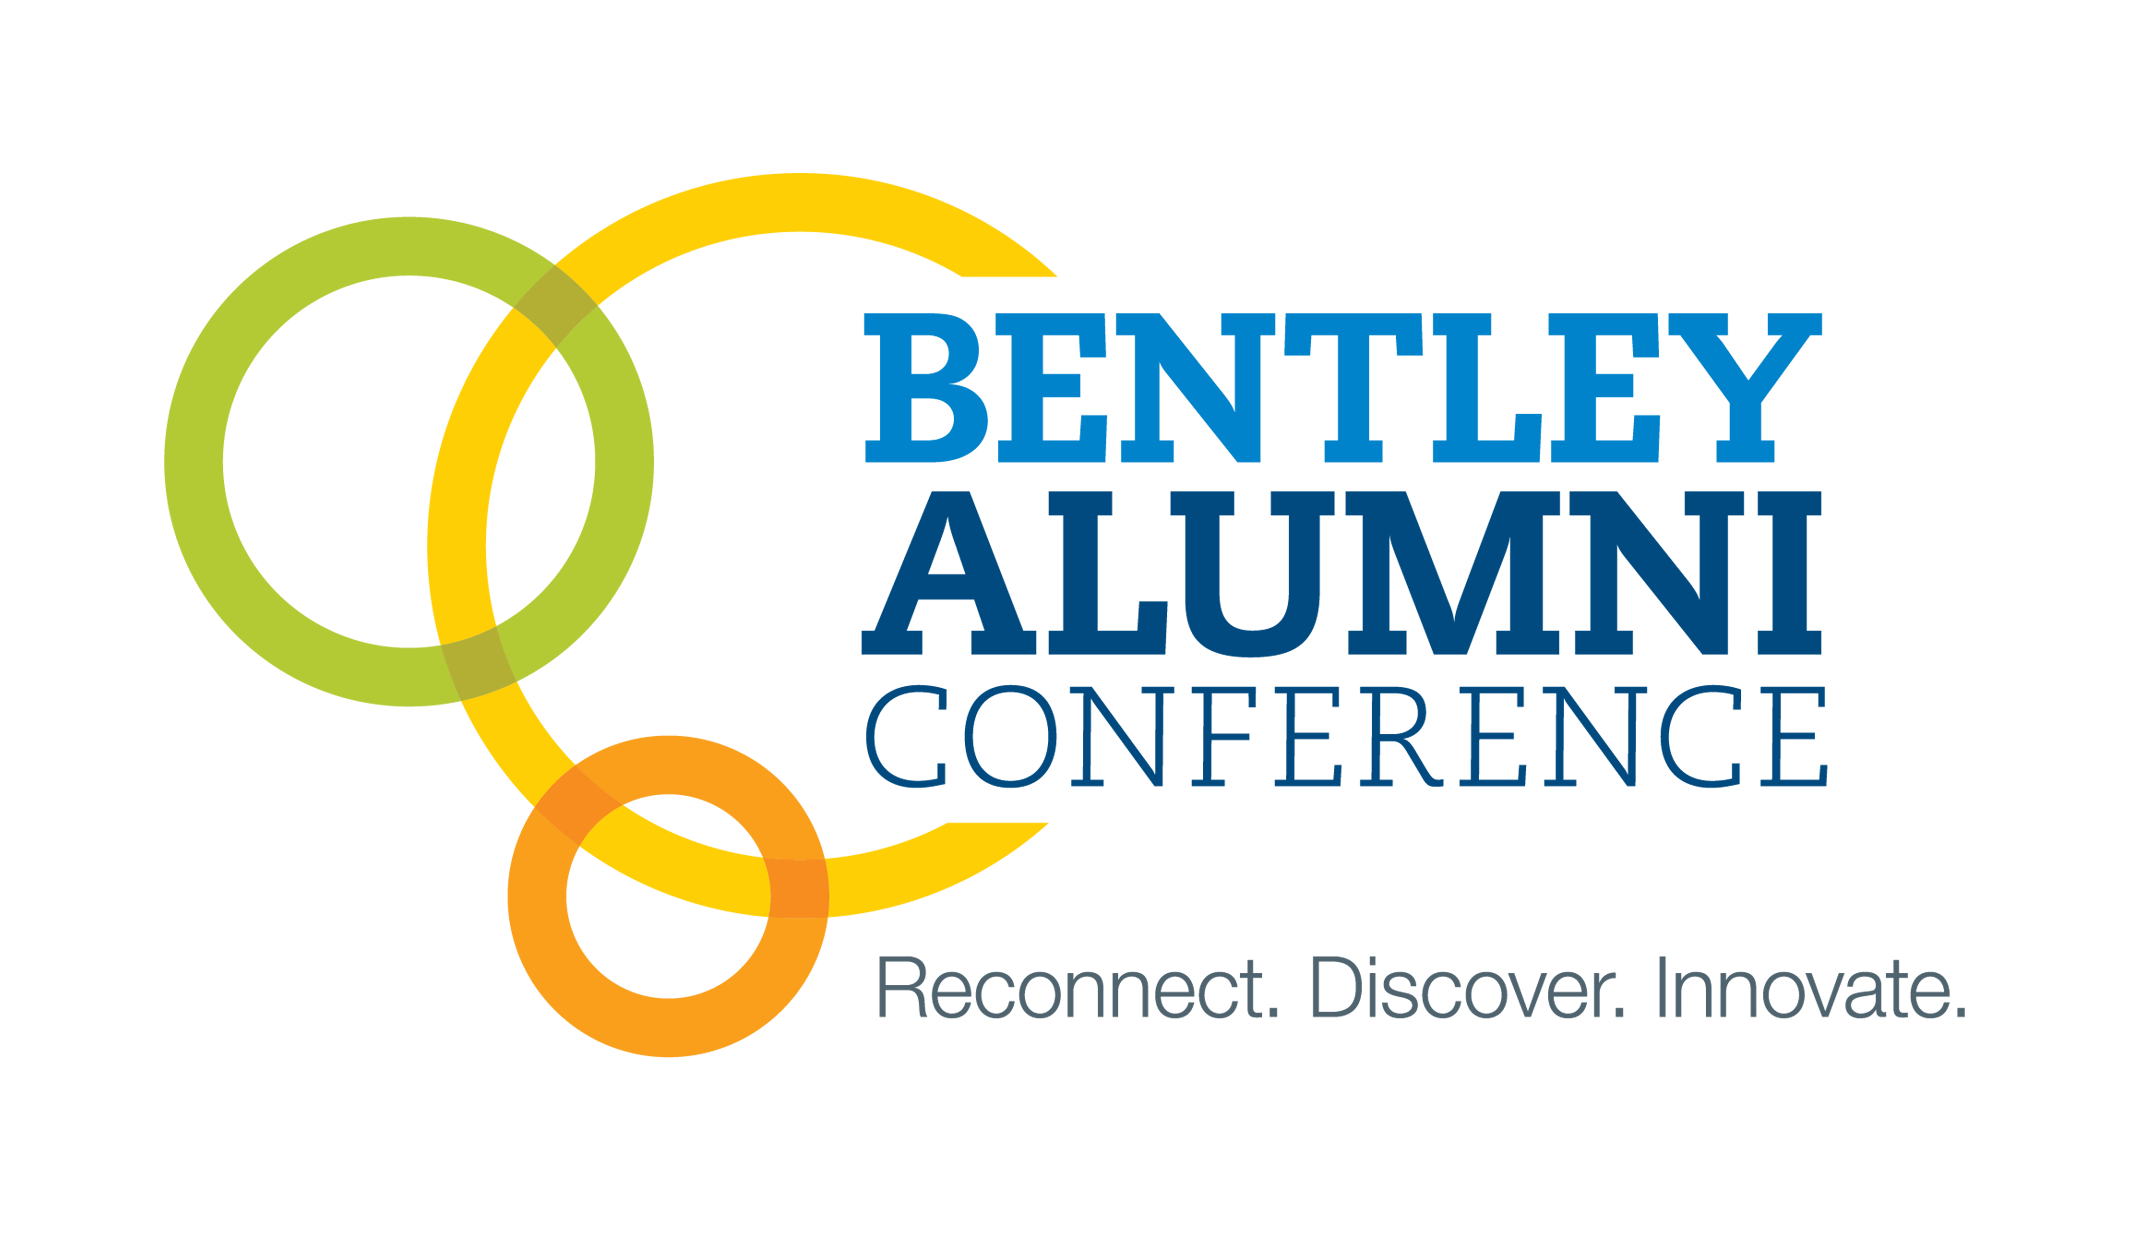 Bentley Alumni Conference - Reconnect. Discover. Innovate